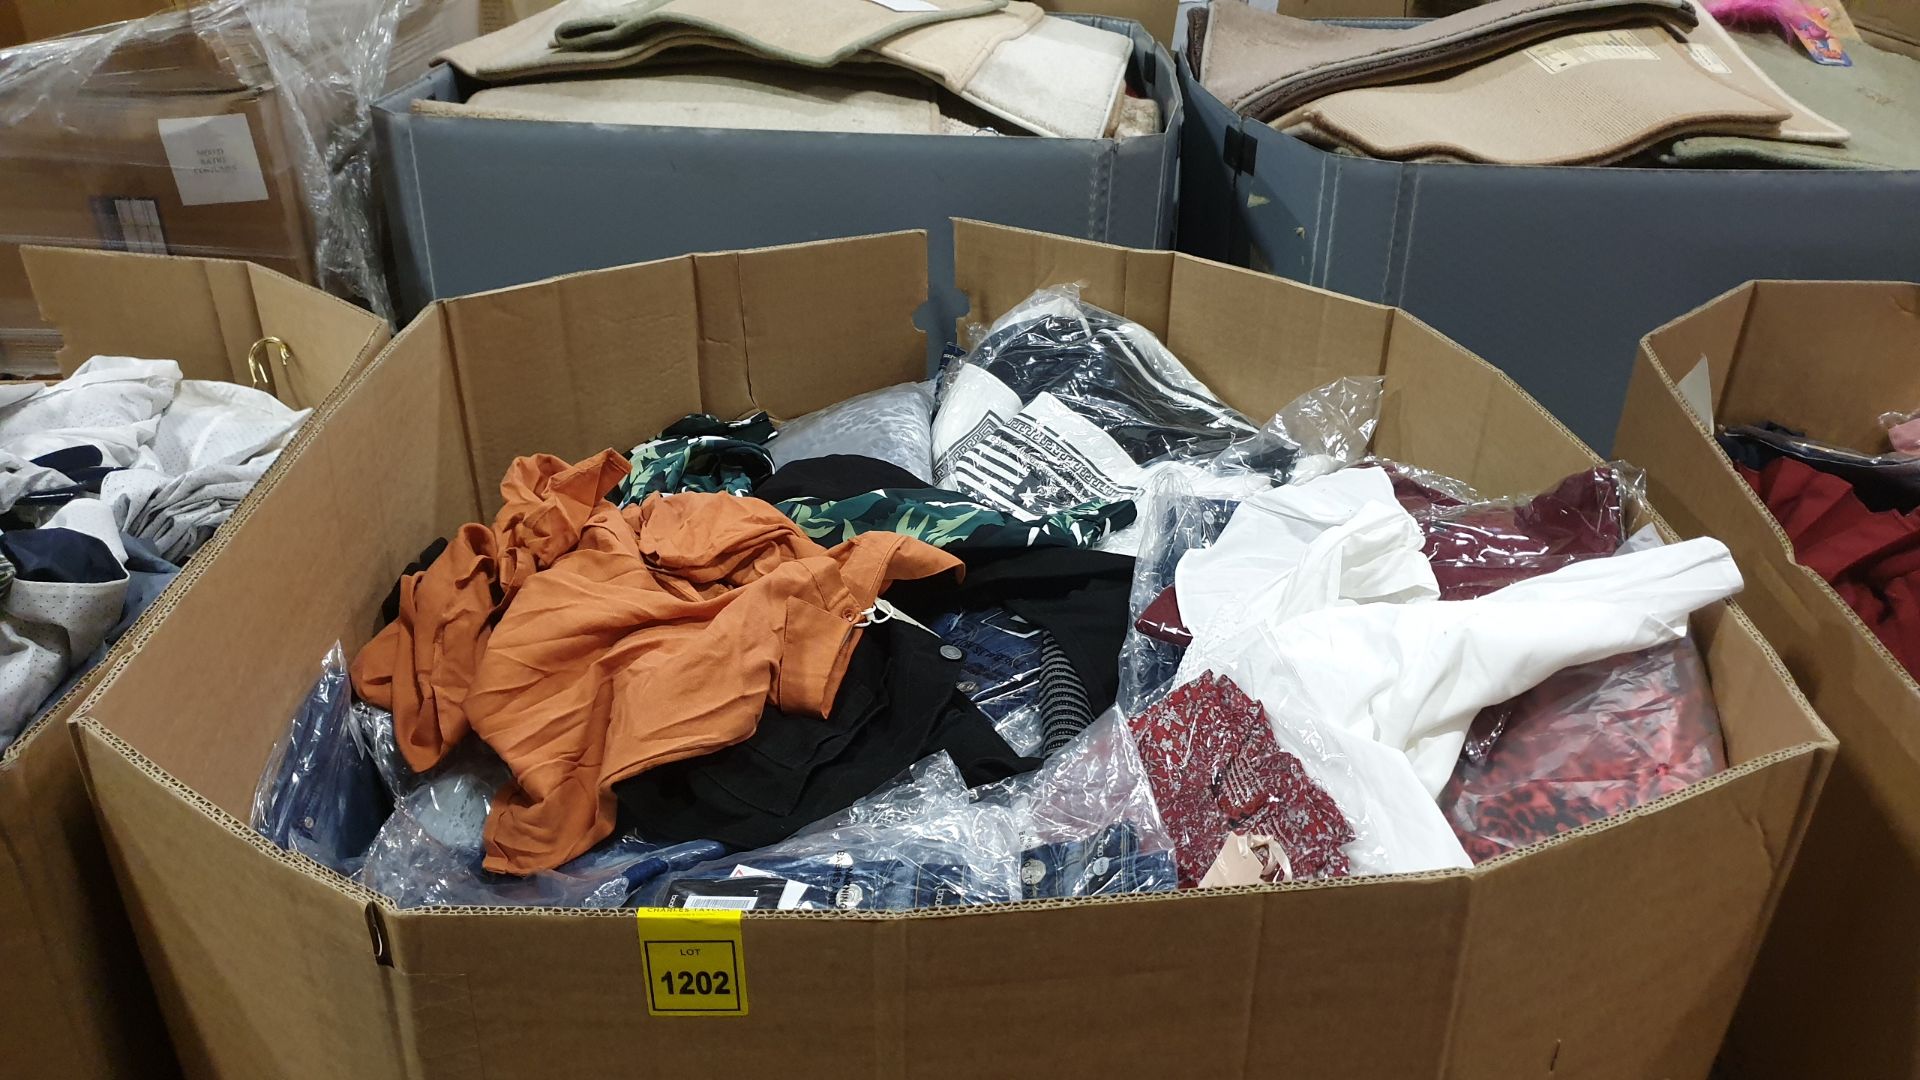 FULL PALLET OF CLOTHING IE BOOHOO MAN JEANS, RETRO&ICONE JACKETS, LILY PARIS TOP, KILIBBI TOPS AND